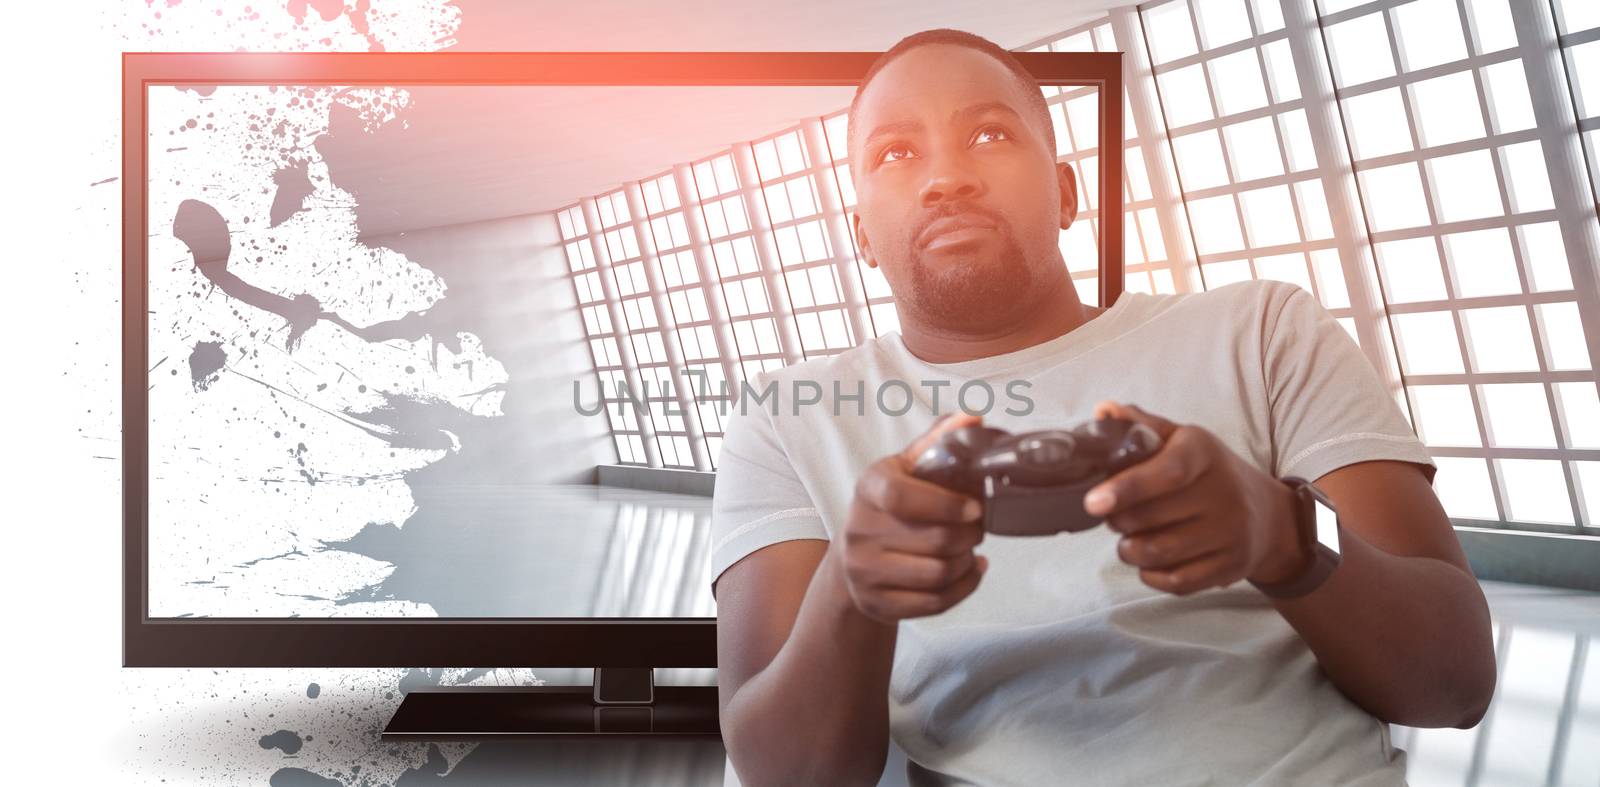 Composite image of man playing video game against white background by Wavebreakmedia